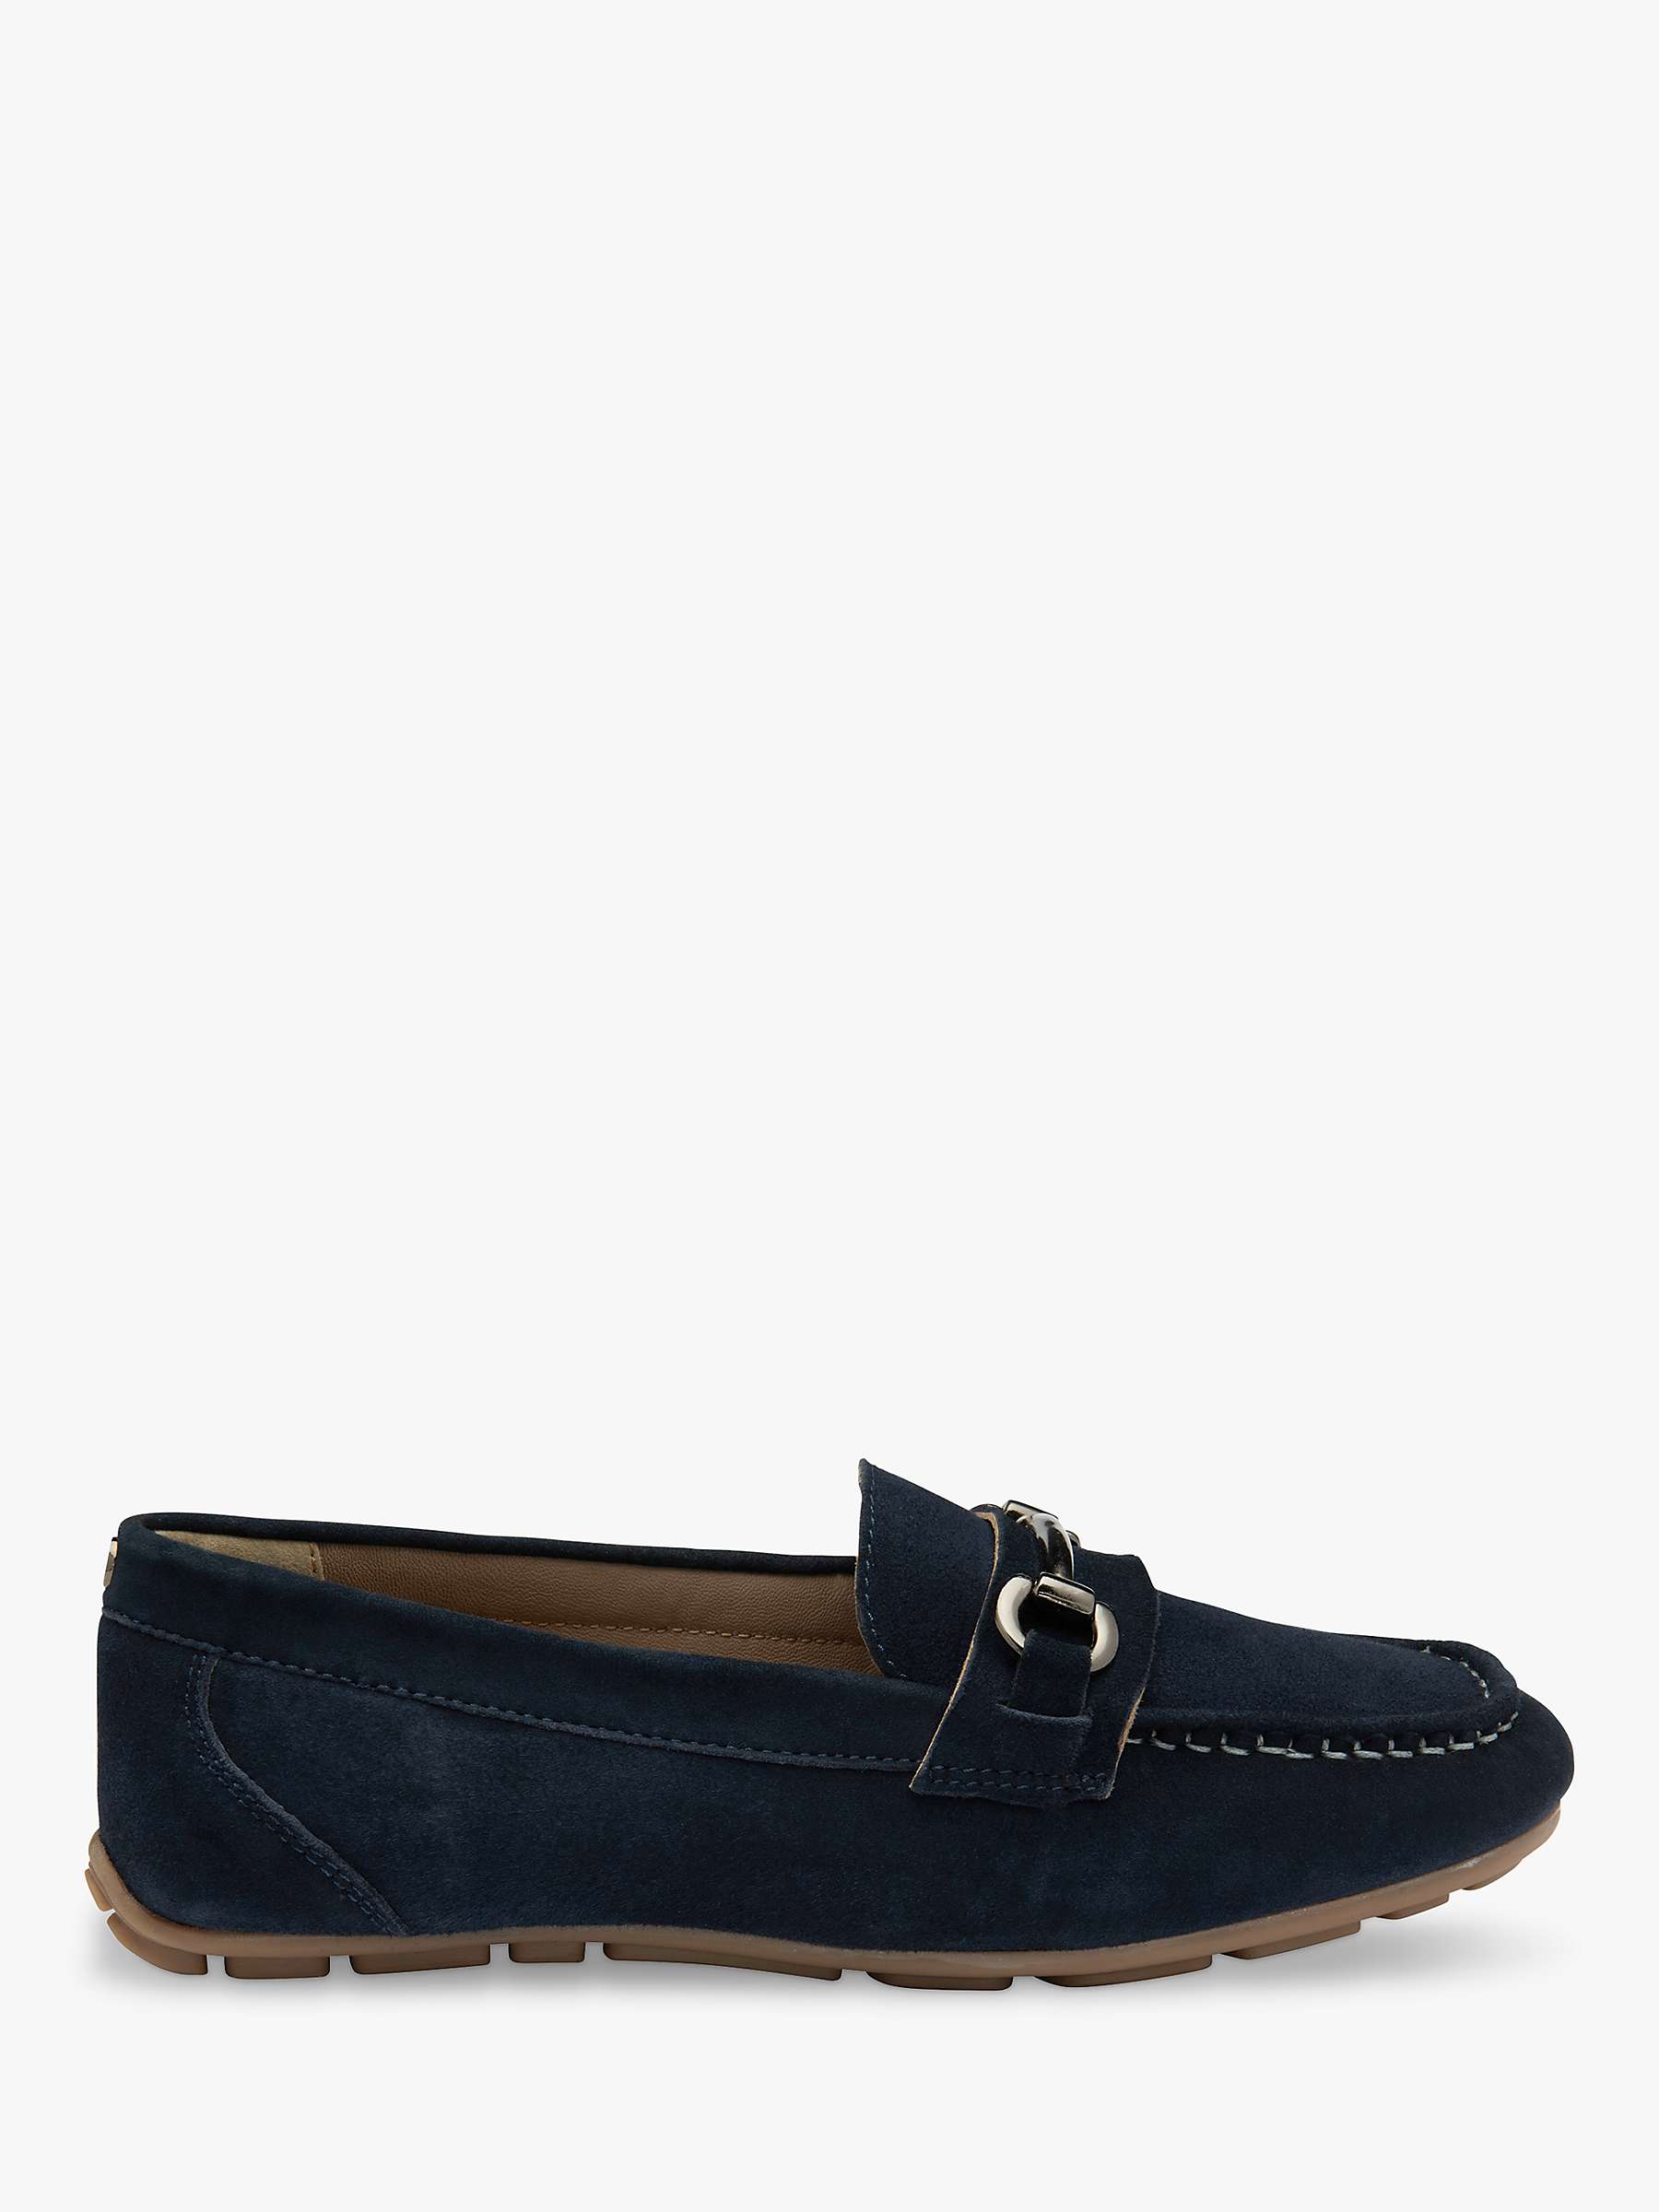 Buy Ravel Dutton Suede Loafers, Navy Online at johnlewis.com